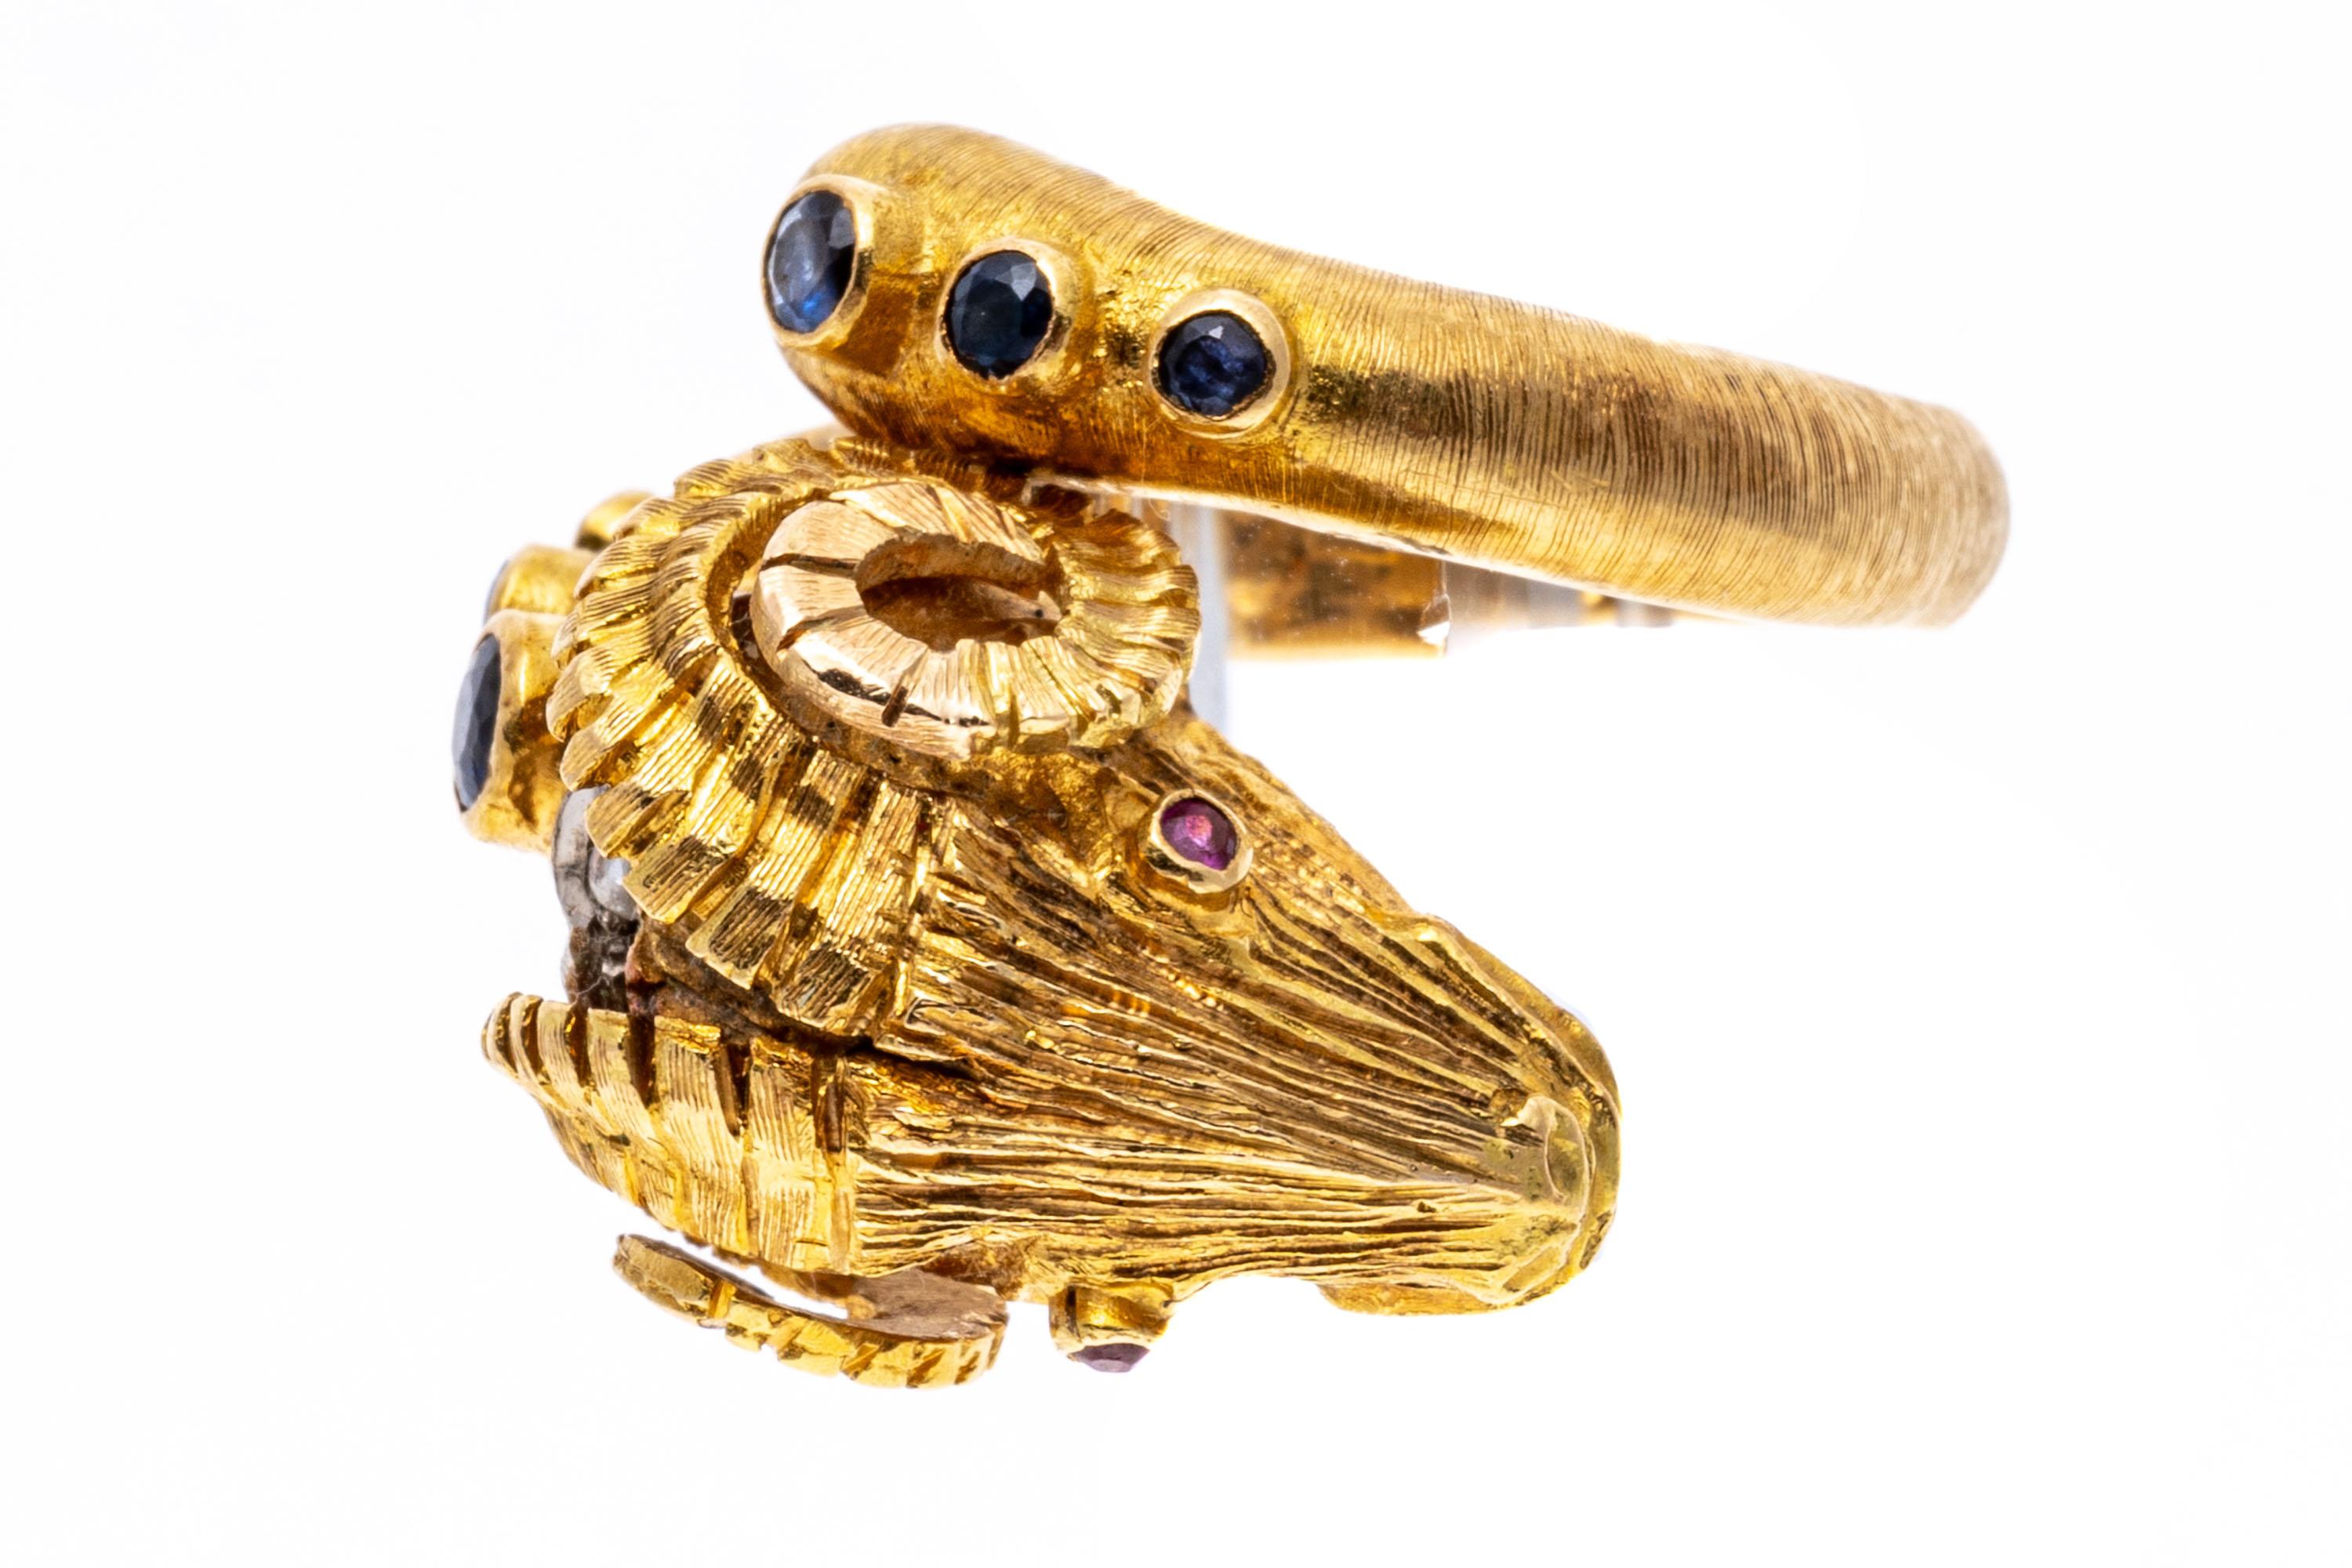 14k Yellow Gold Rams Head Ring With Sapphires, Rubies And Diamonds, Size 7-8 For Sale 4